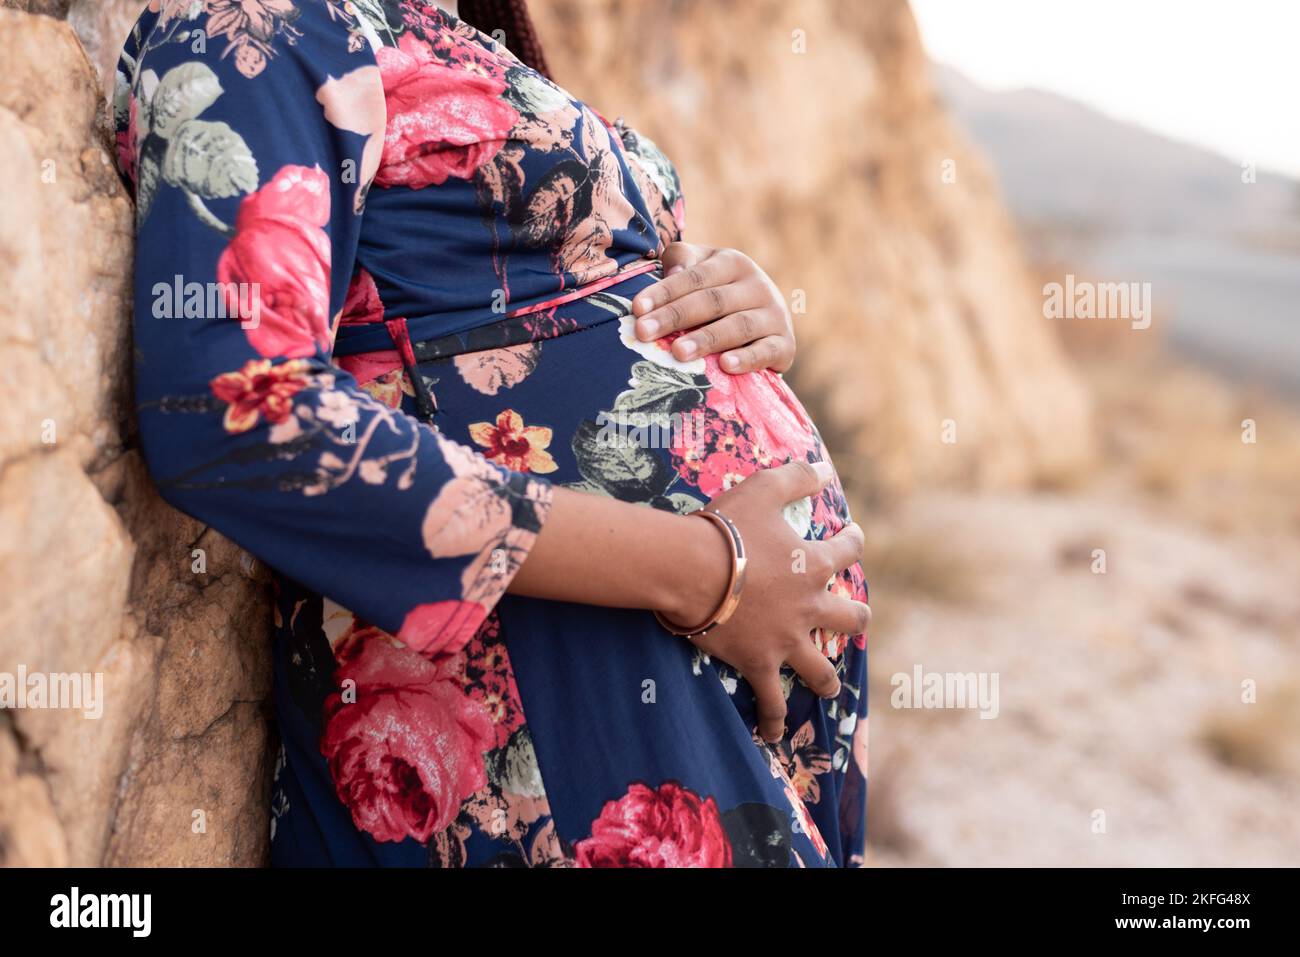 An expectant mom holding her pregnant abdomen Stock Photo